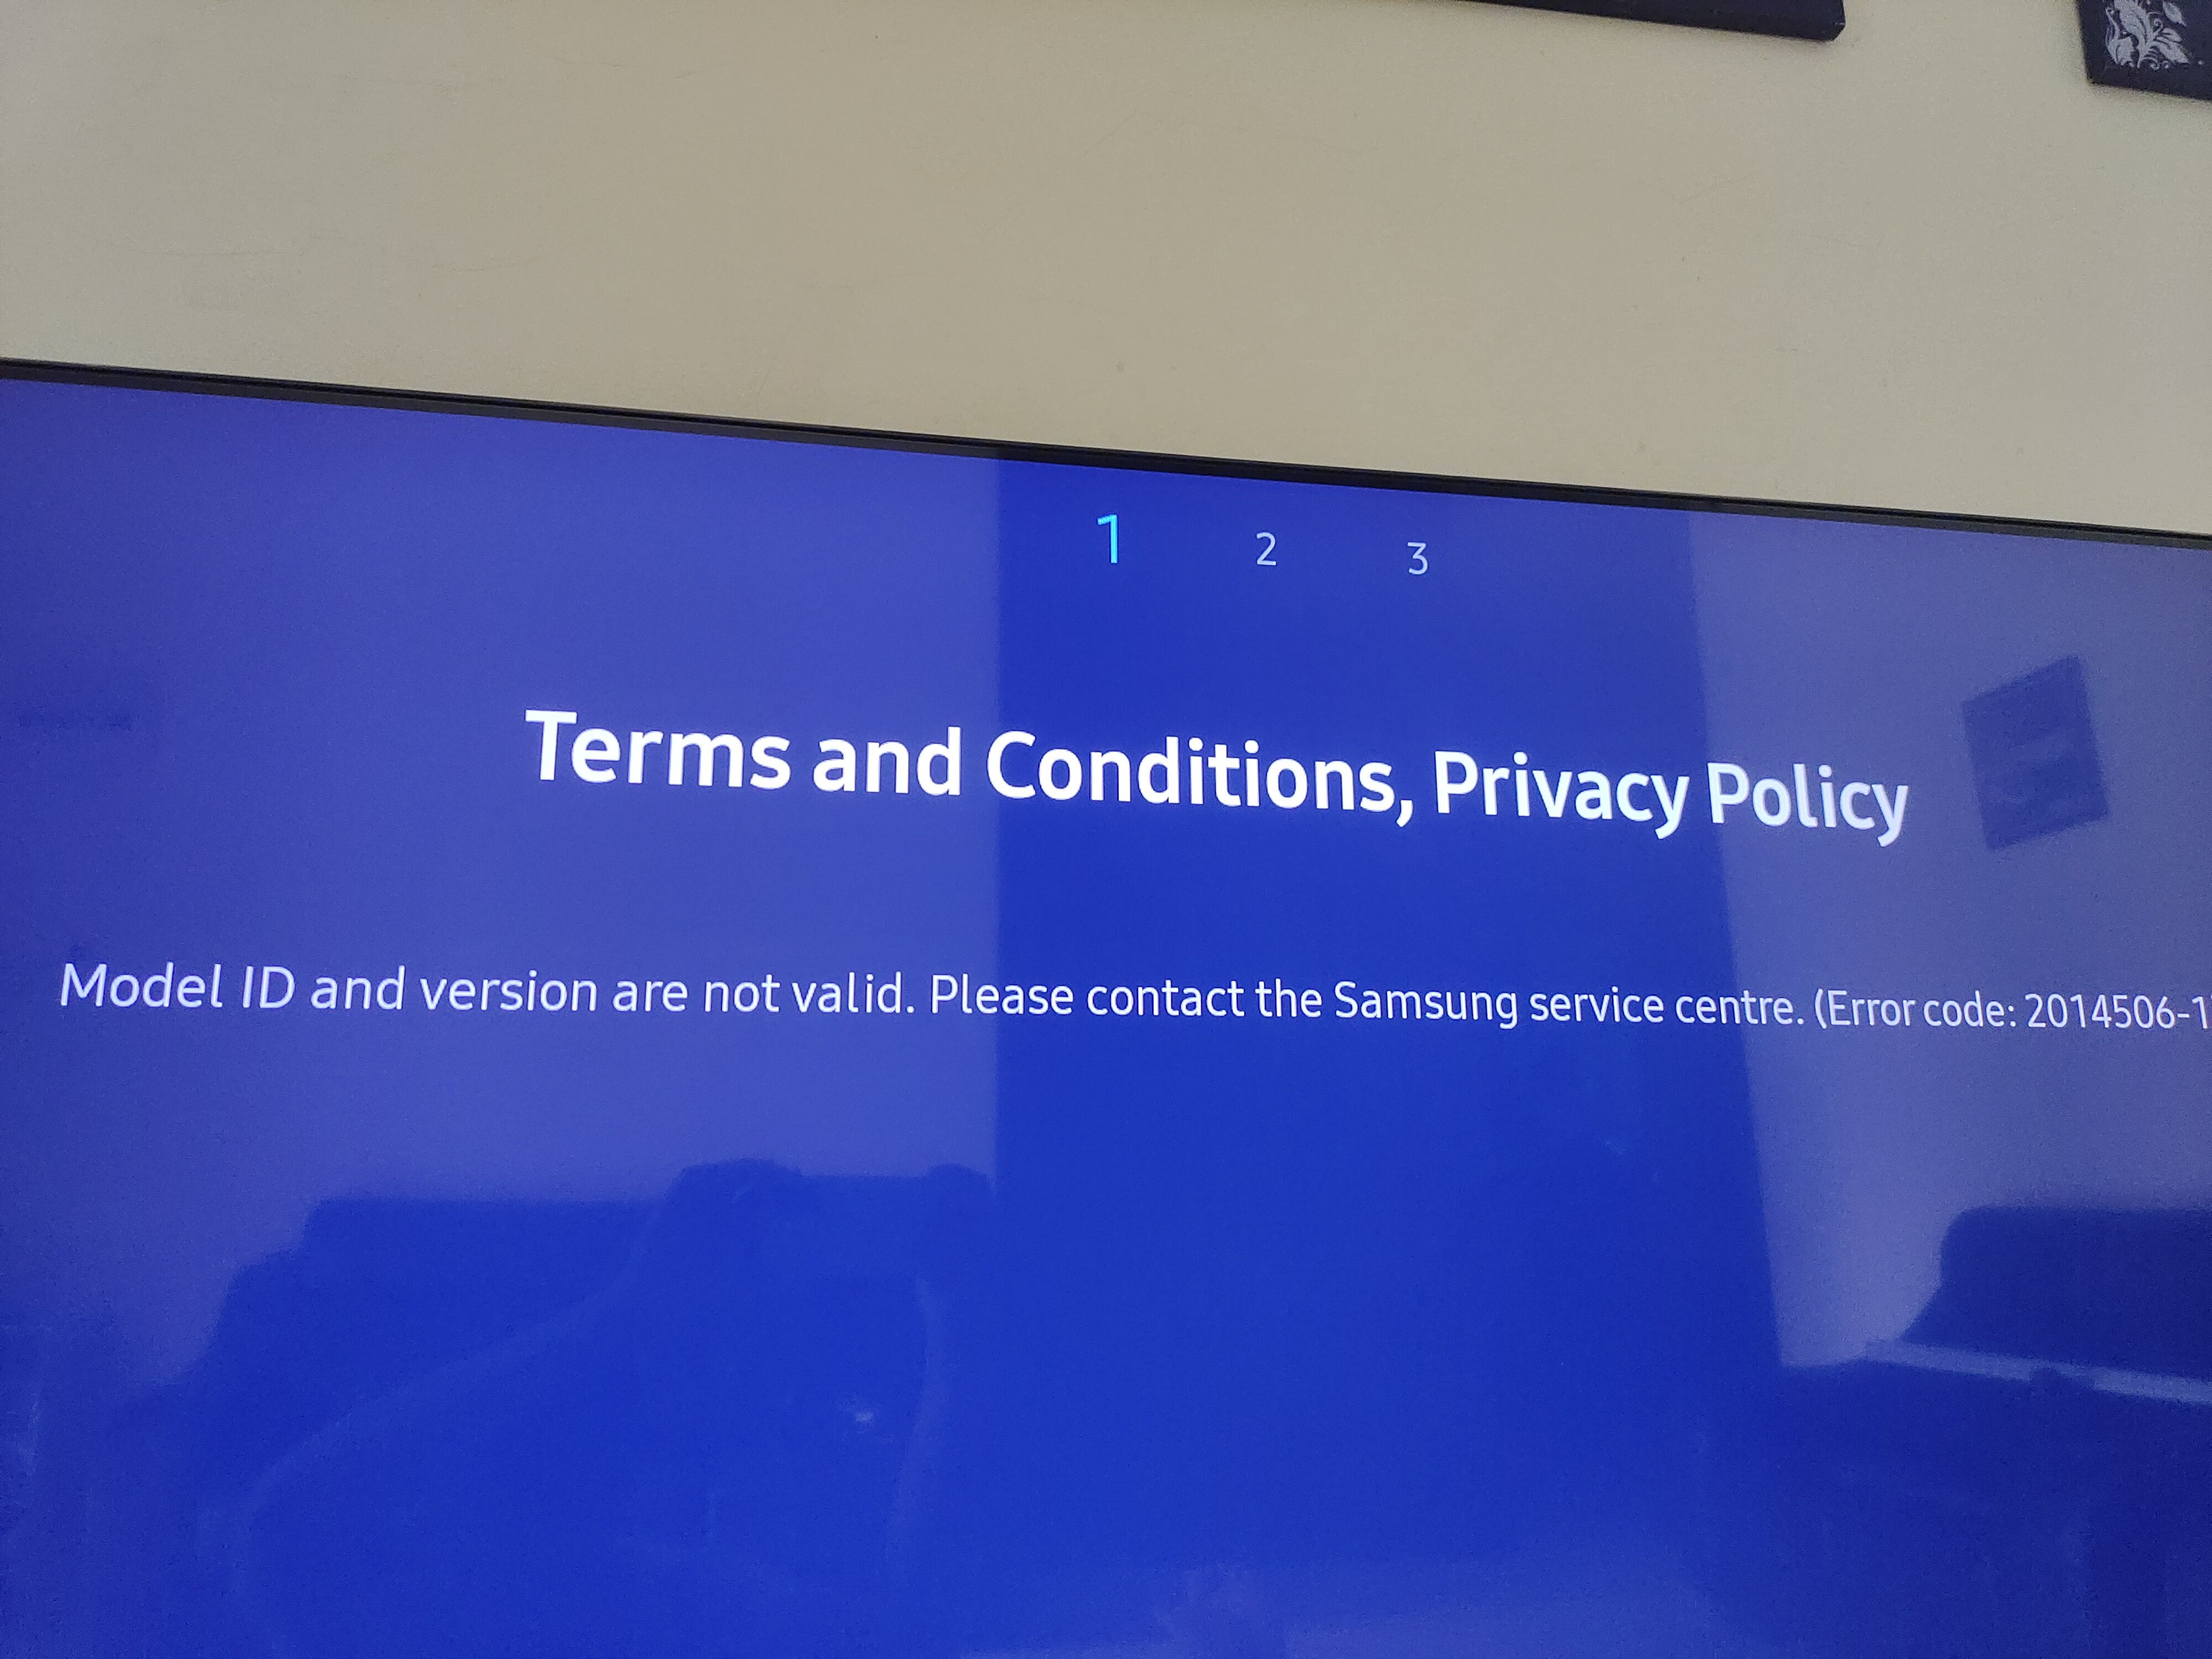 Cant download terms and conditions and privacy policy - Samsung Community